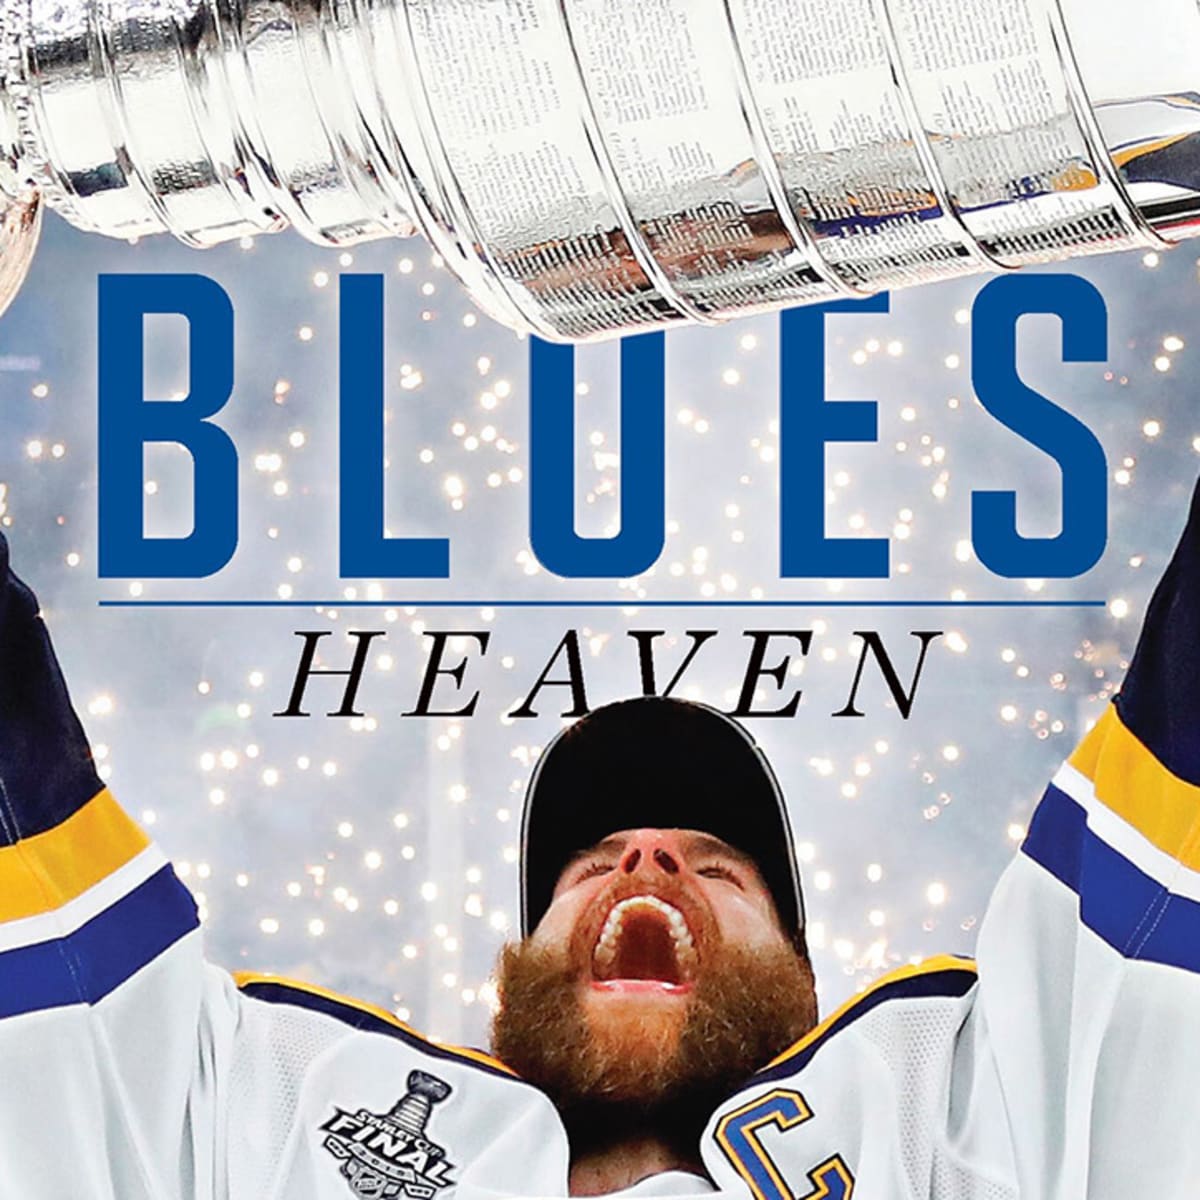 St. Louis Blues - Sports Illustrated